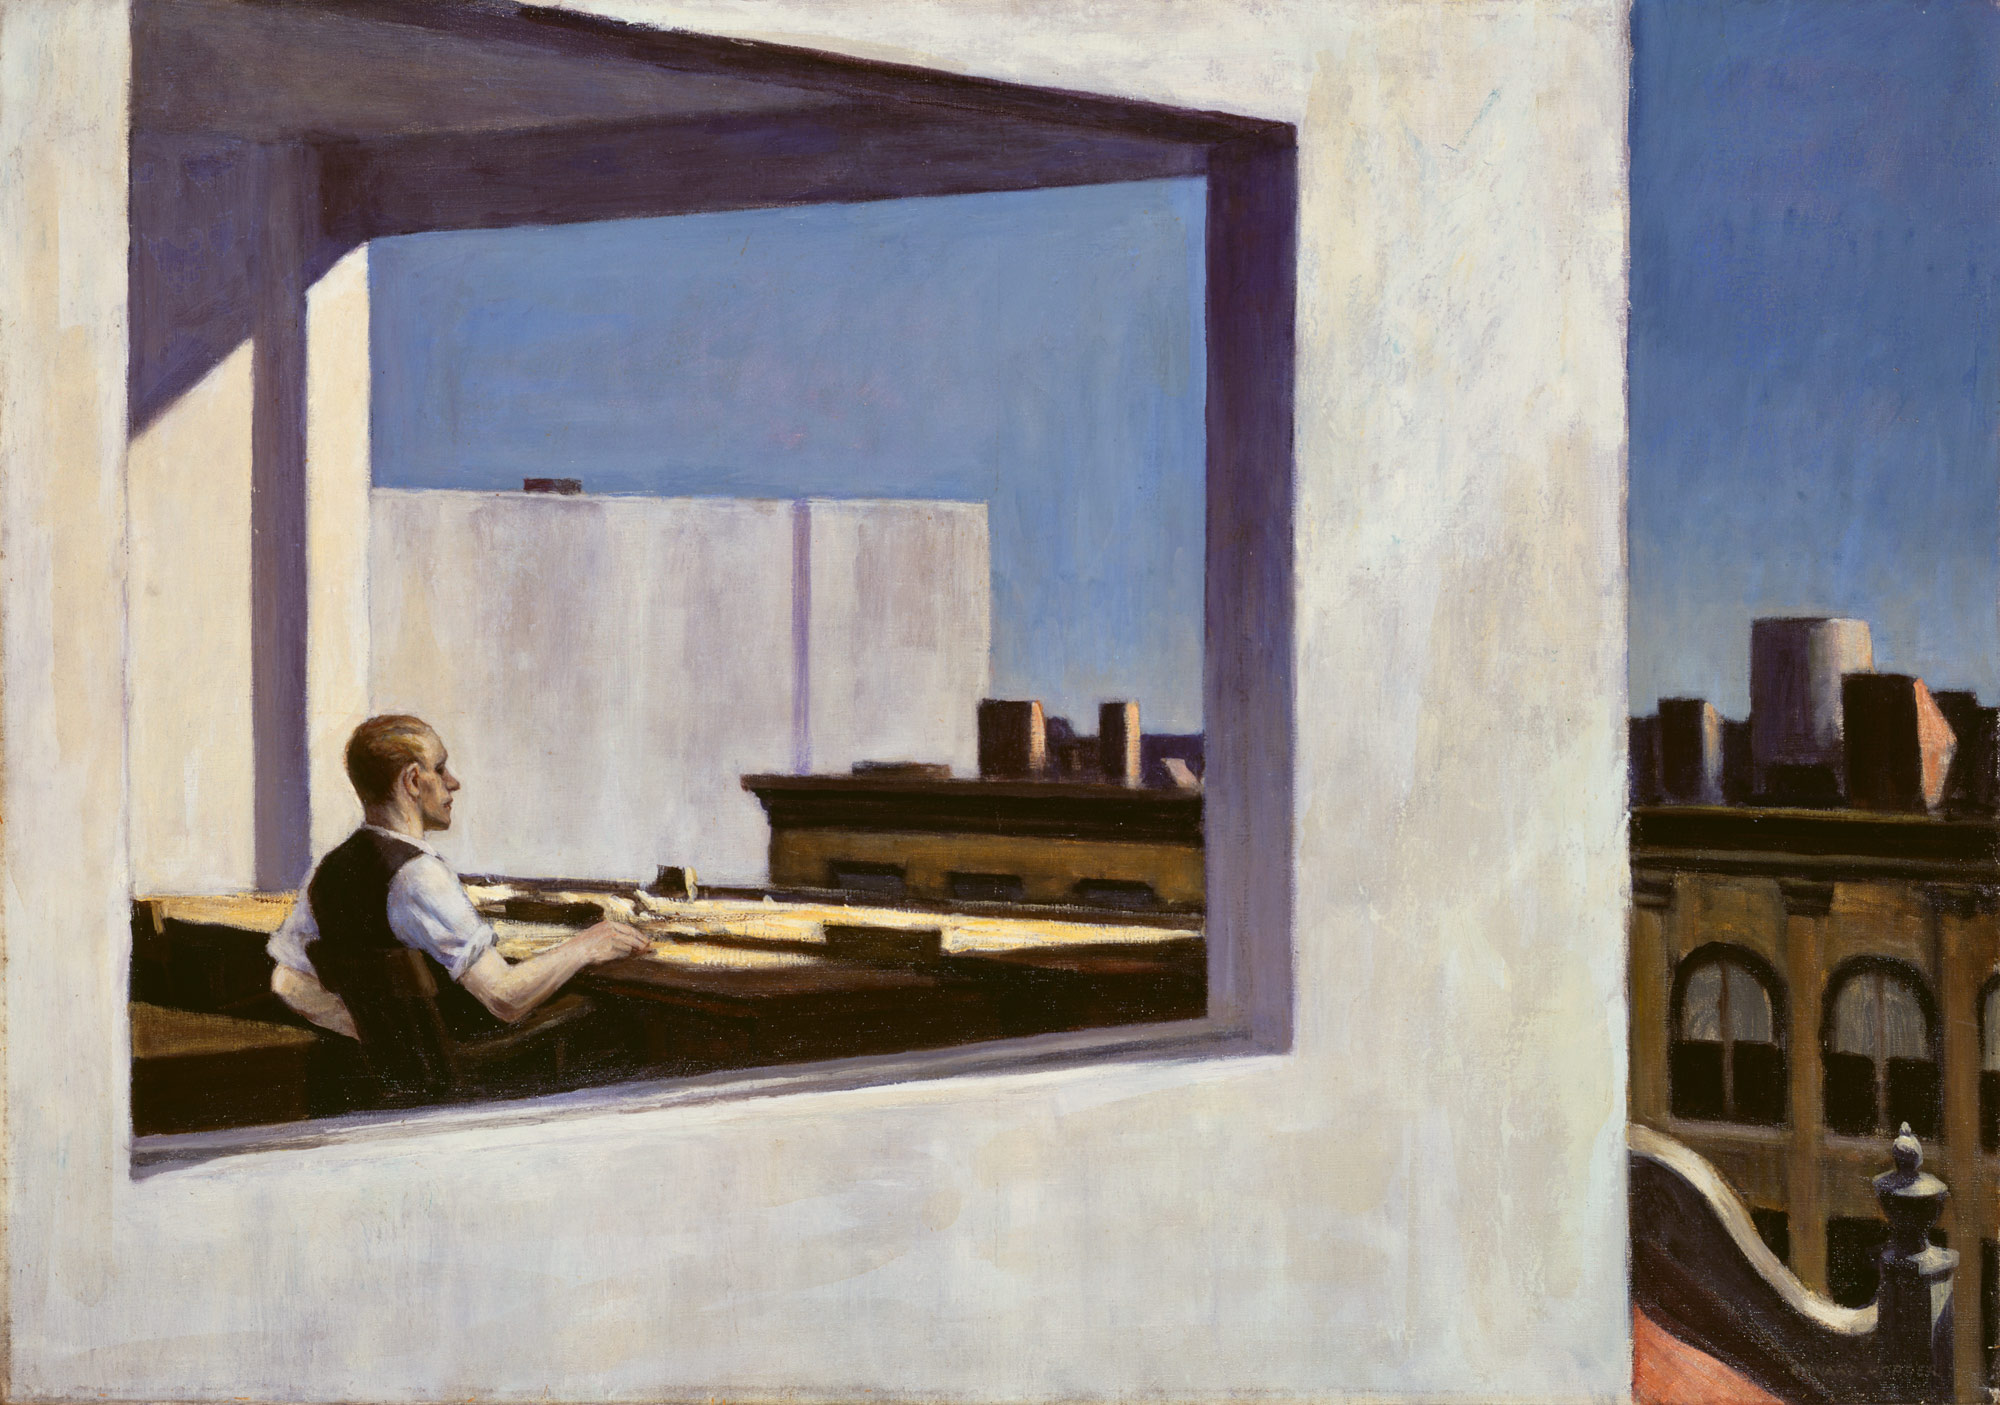 Working Title/Artist: Edward Hopper: Office in a Small City Department: Modern Art Culture/Period/Location: HB/TOA Date Code: Working Date: photography by mma 1979/89, transparency #11ad scanned and retouched by film and media (jn) 5_16_07